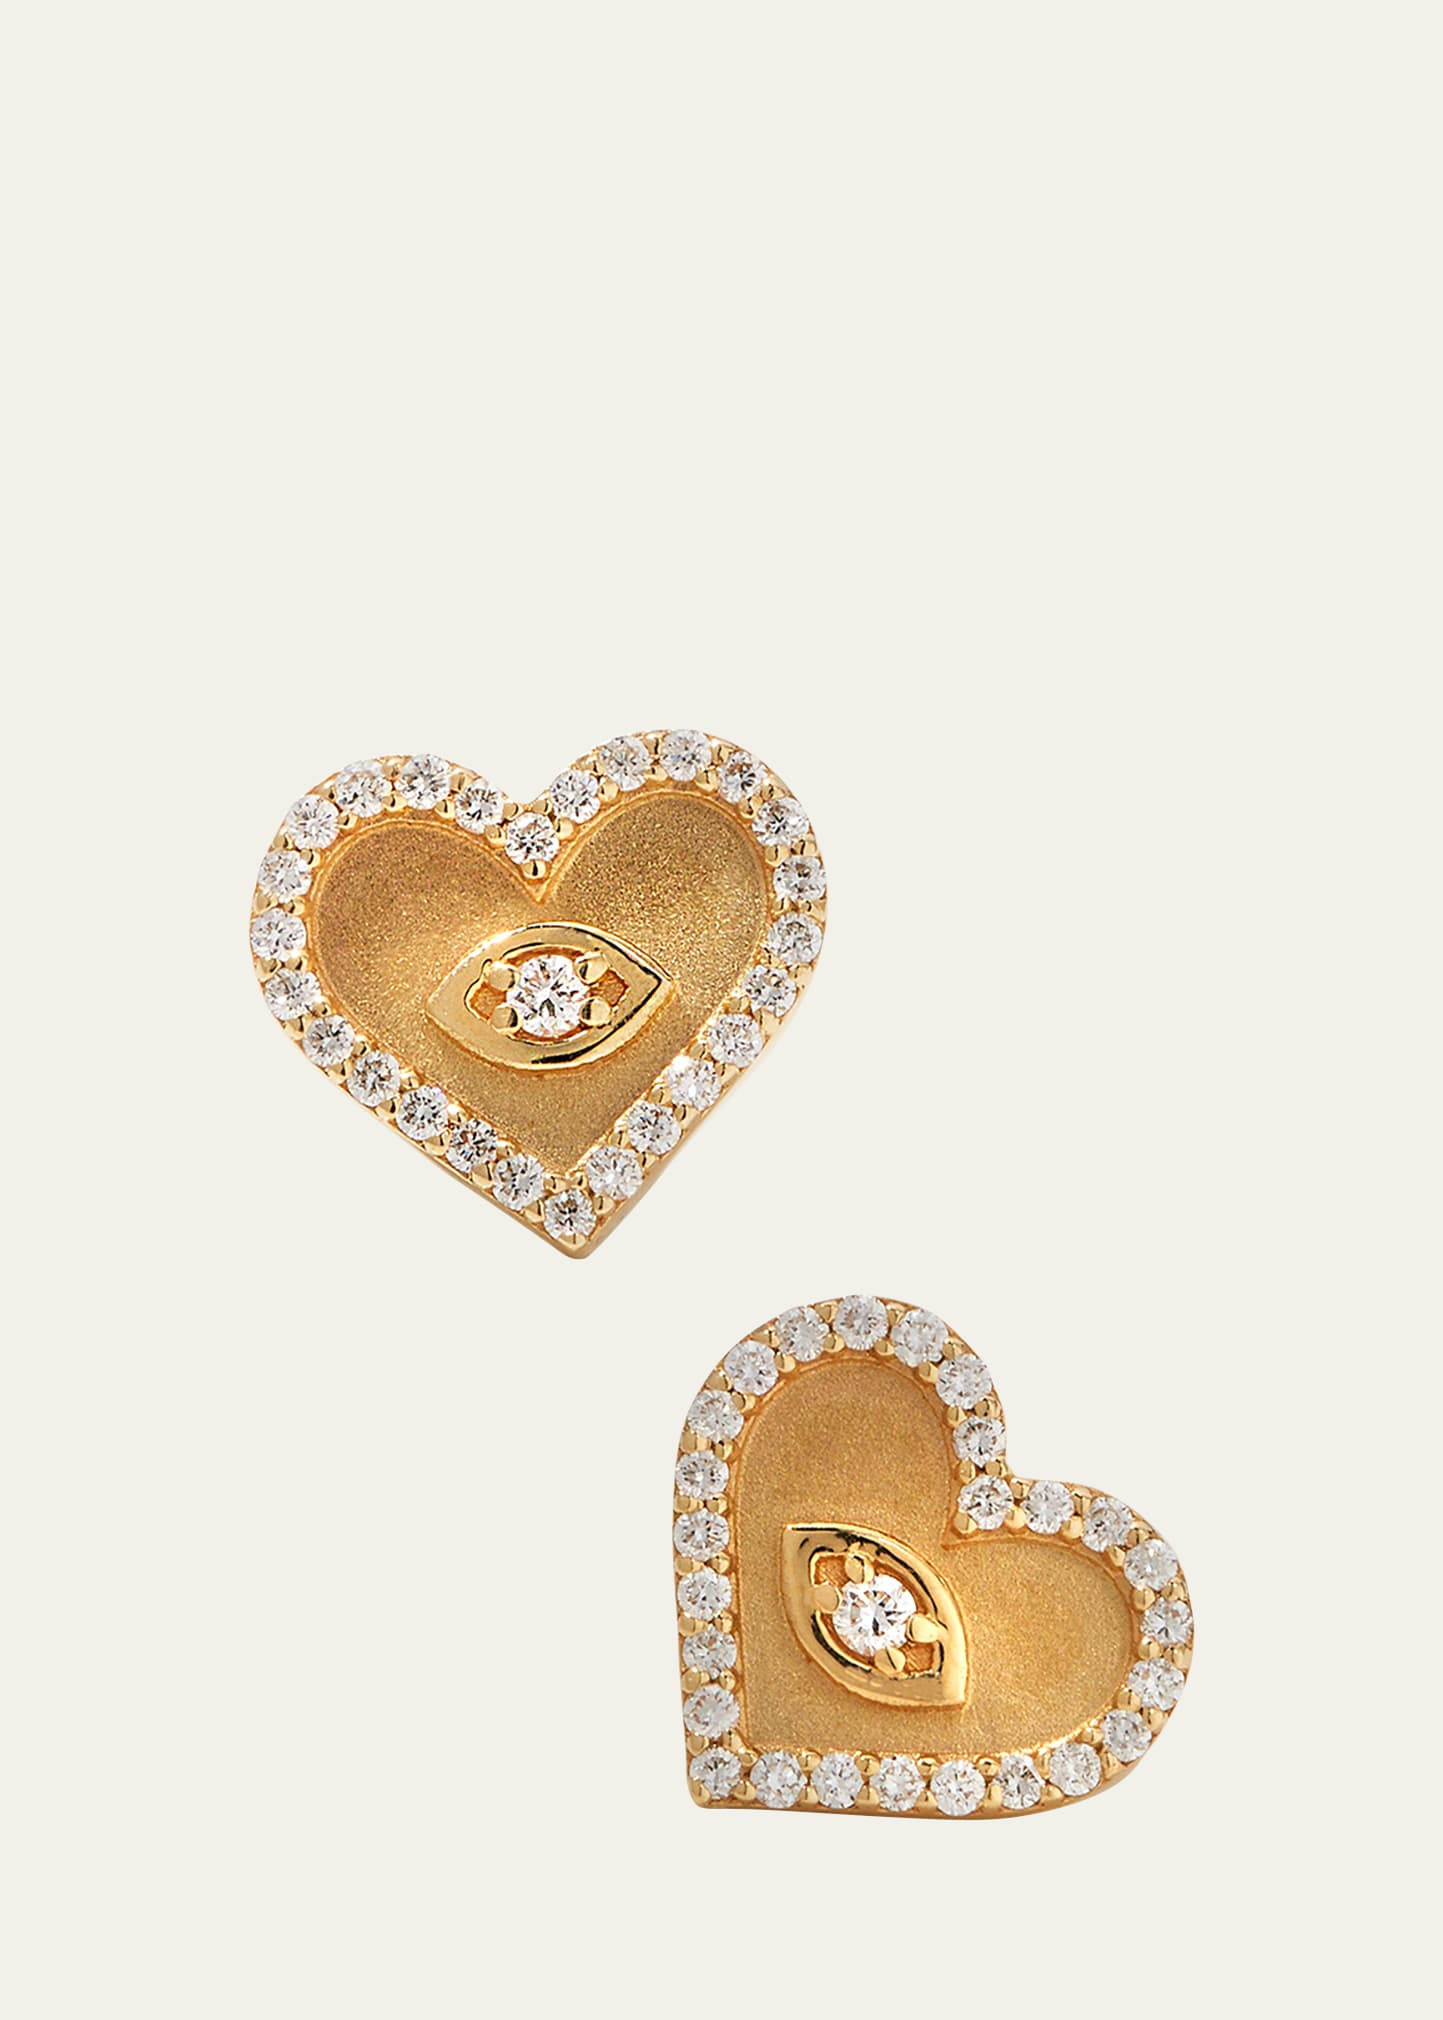 SYDNEY EVAN YELLOW GOLD SMALL HEART EARRINGS WITH MARQUISE EYE